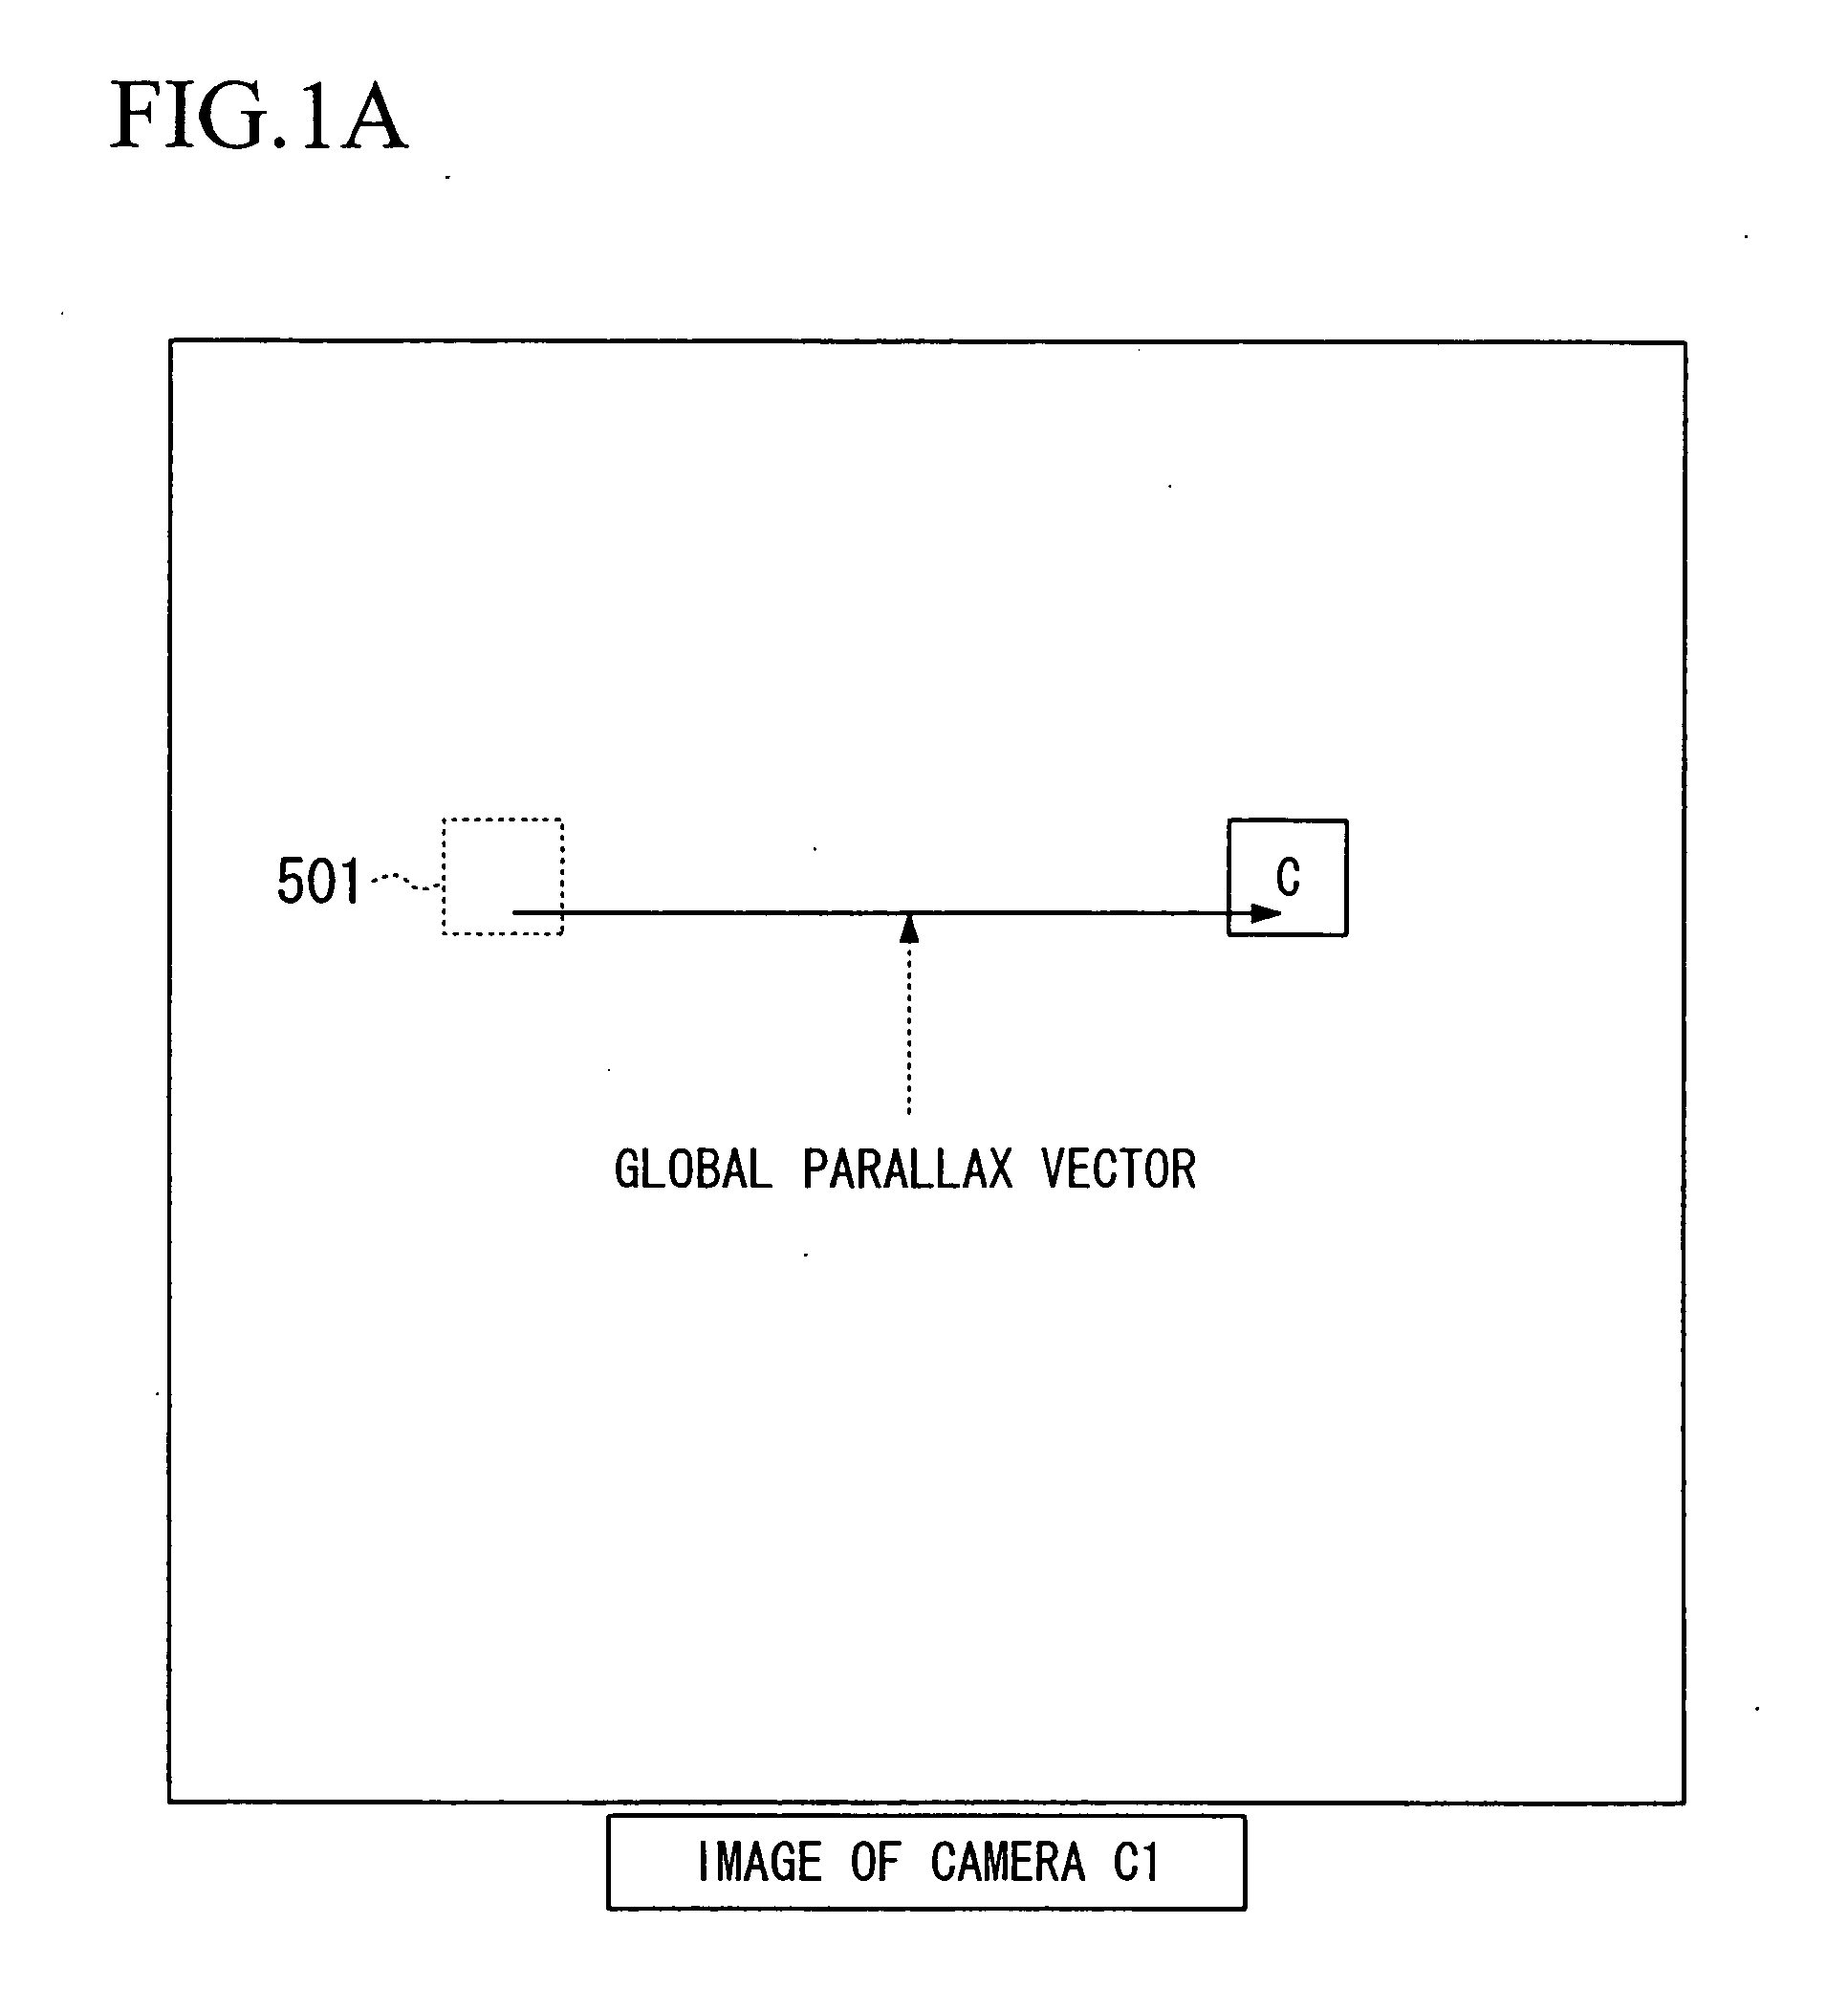 Video encoding method and apparatus, video decoding method and apparatus, programs therefor, and storage media for storing the programs